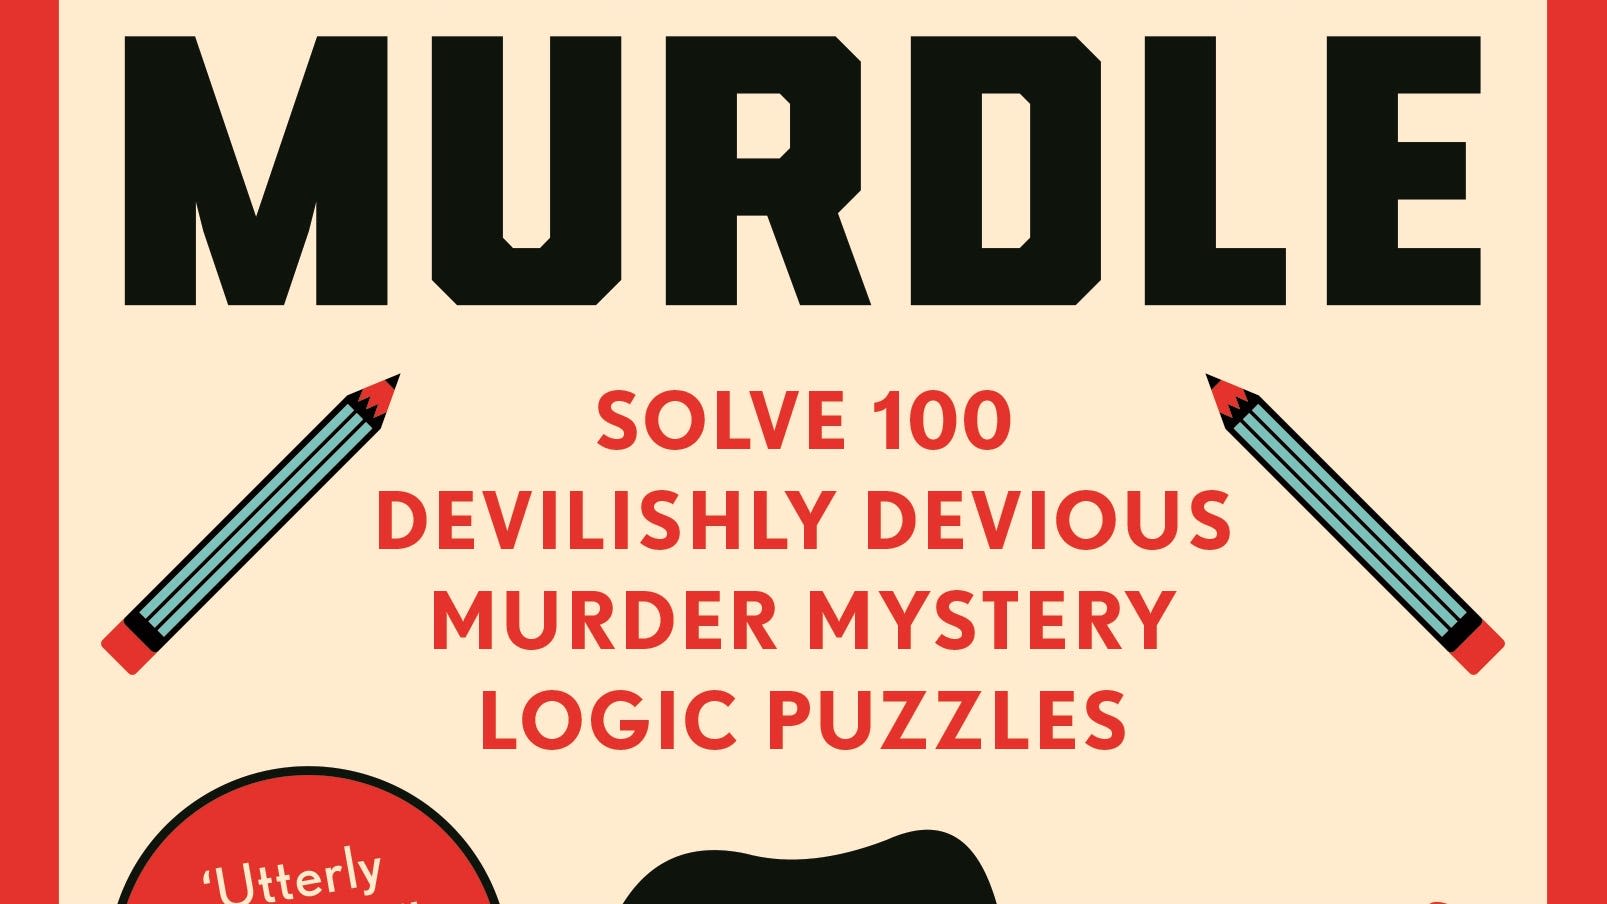 Murder mystery puzzle collection named book of the year